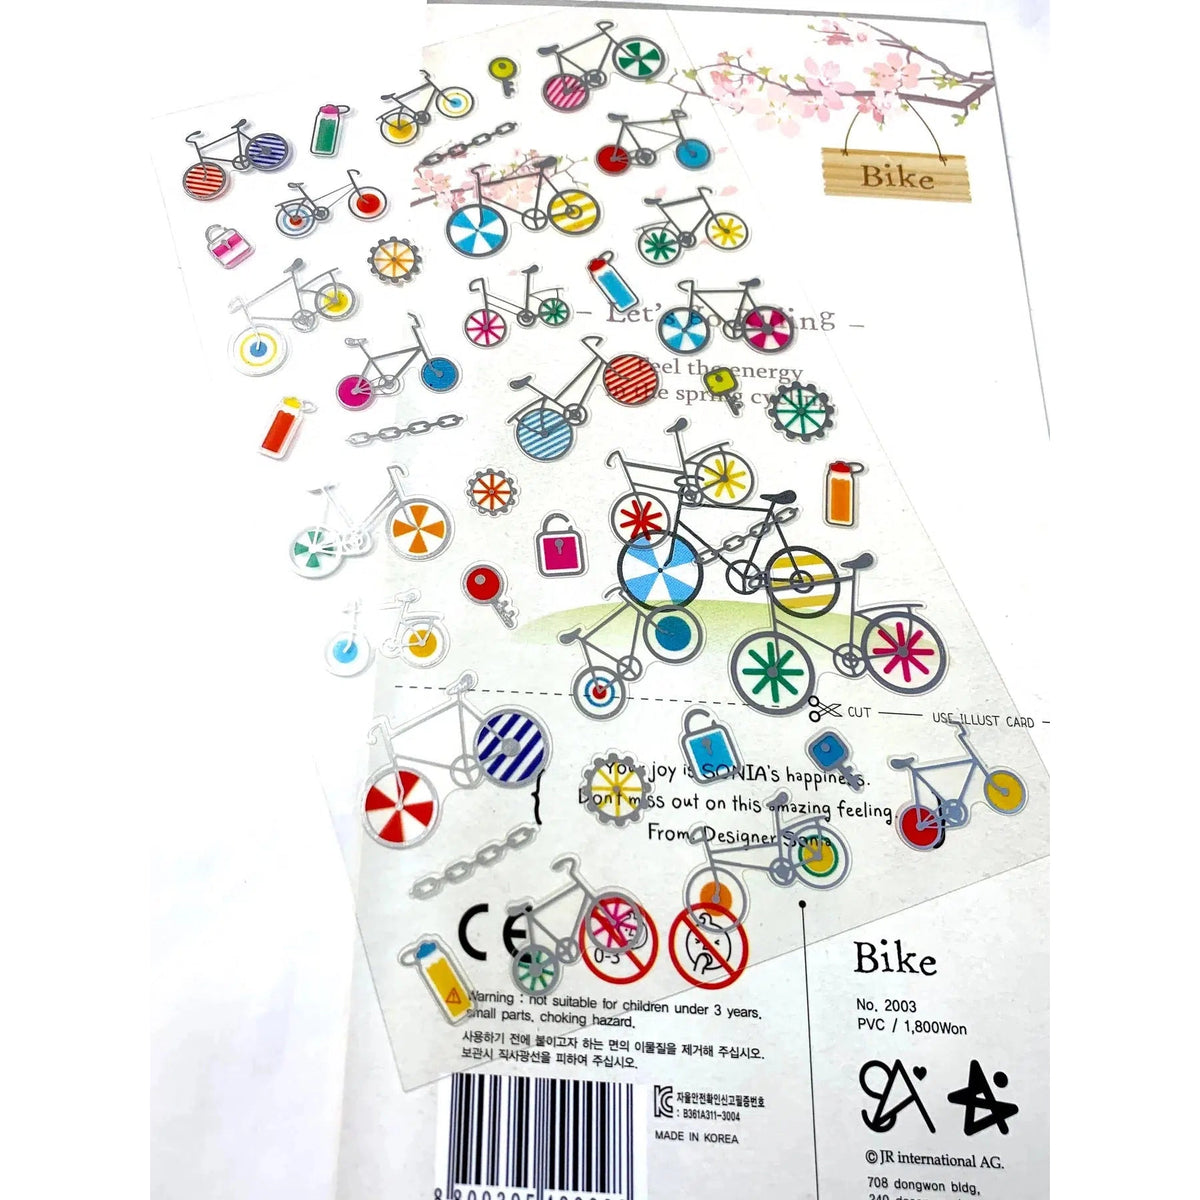 Rear view of package of Bike PVC Stickers with a sheet of the stickers laying across the package.